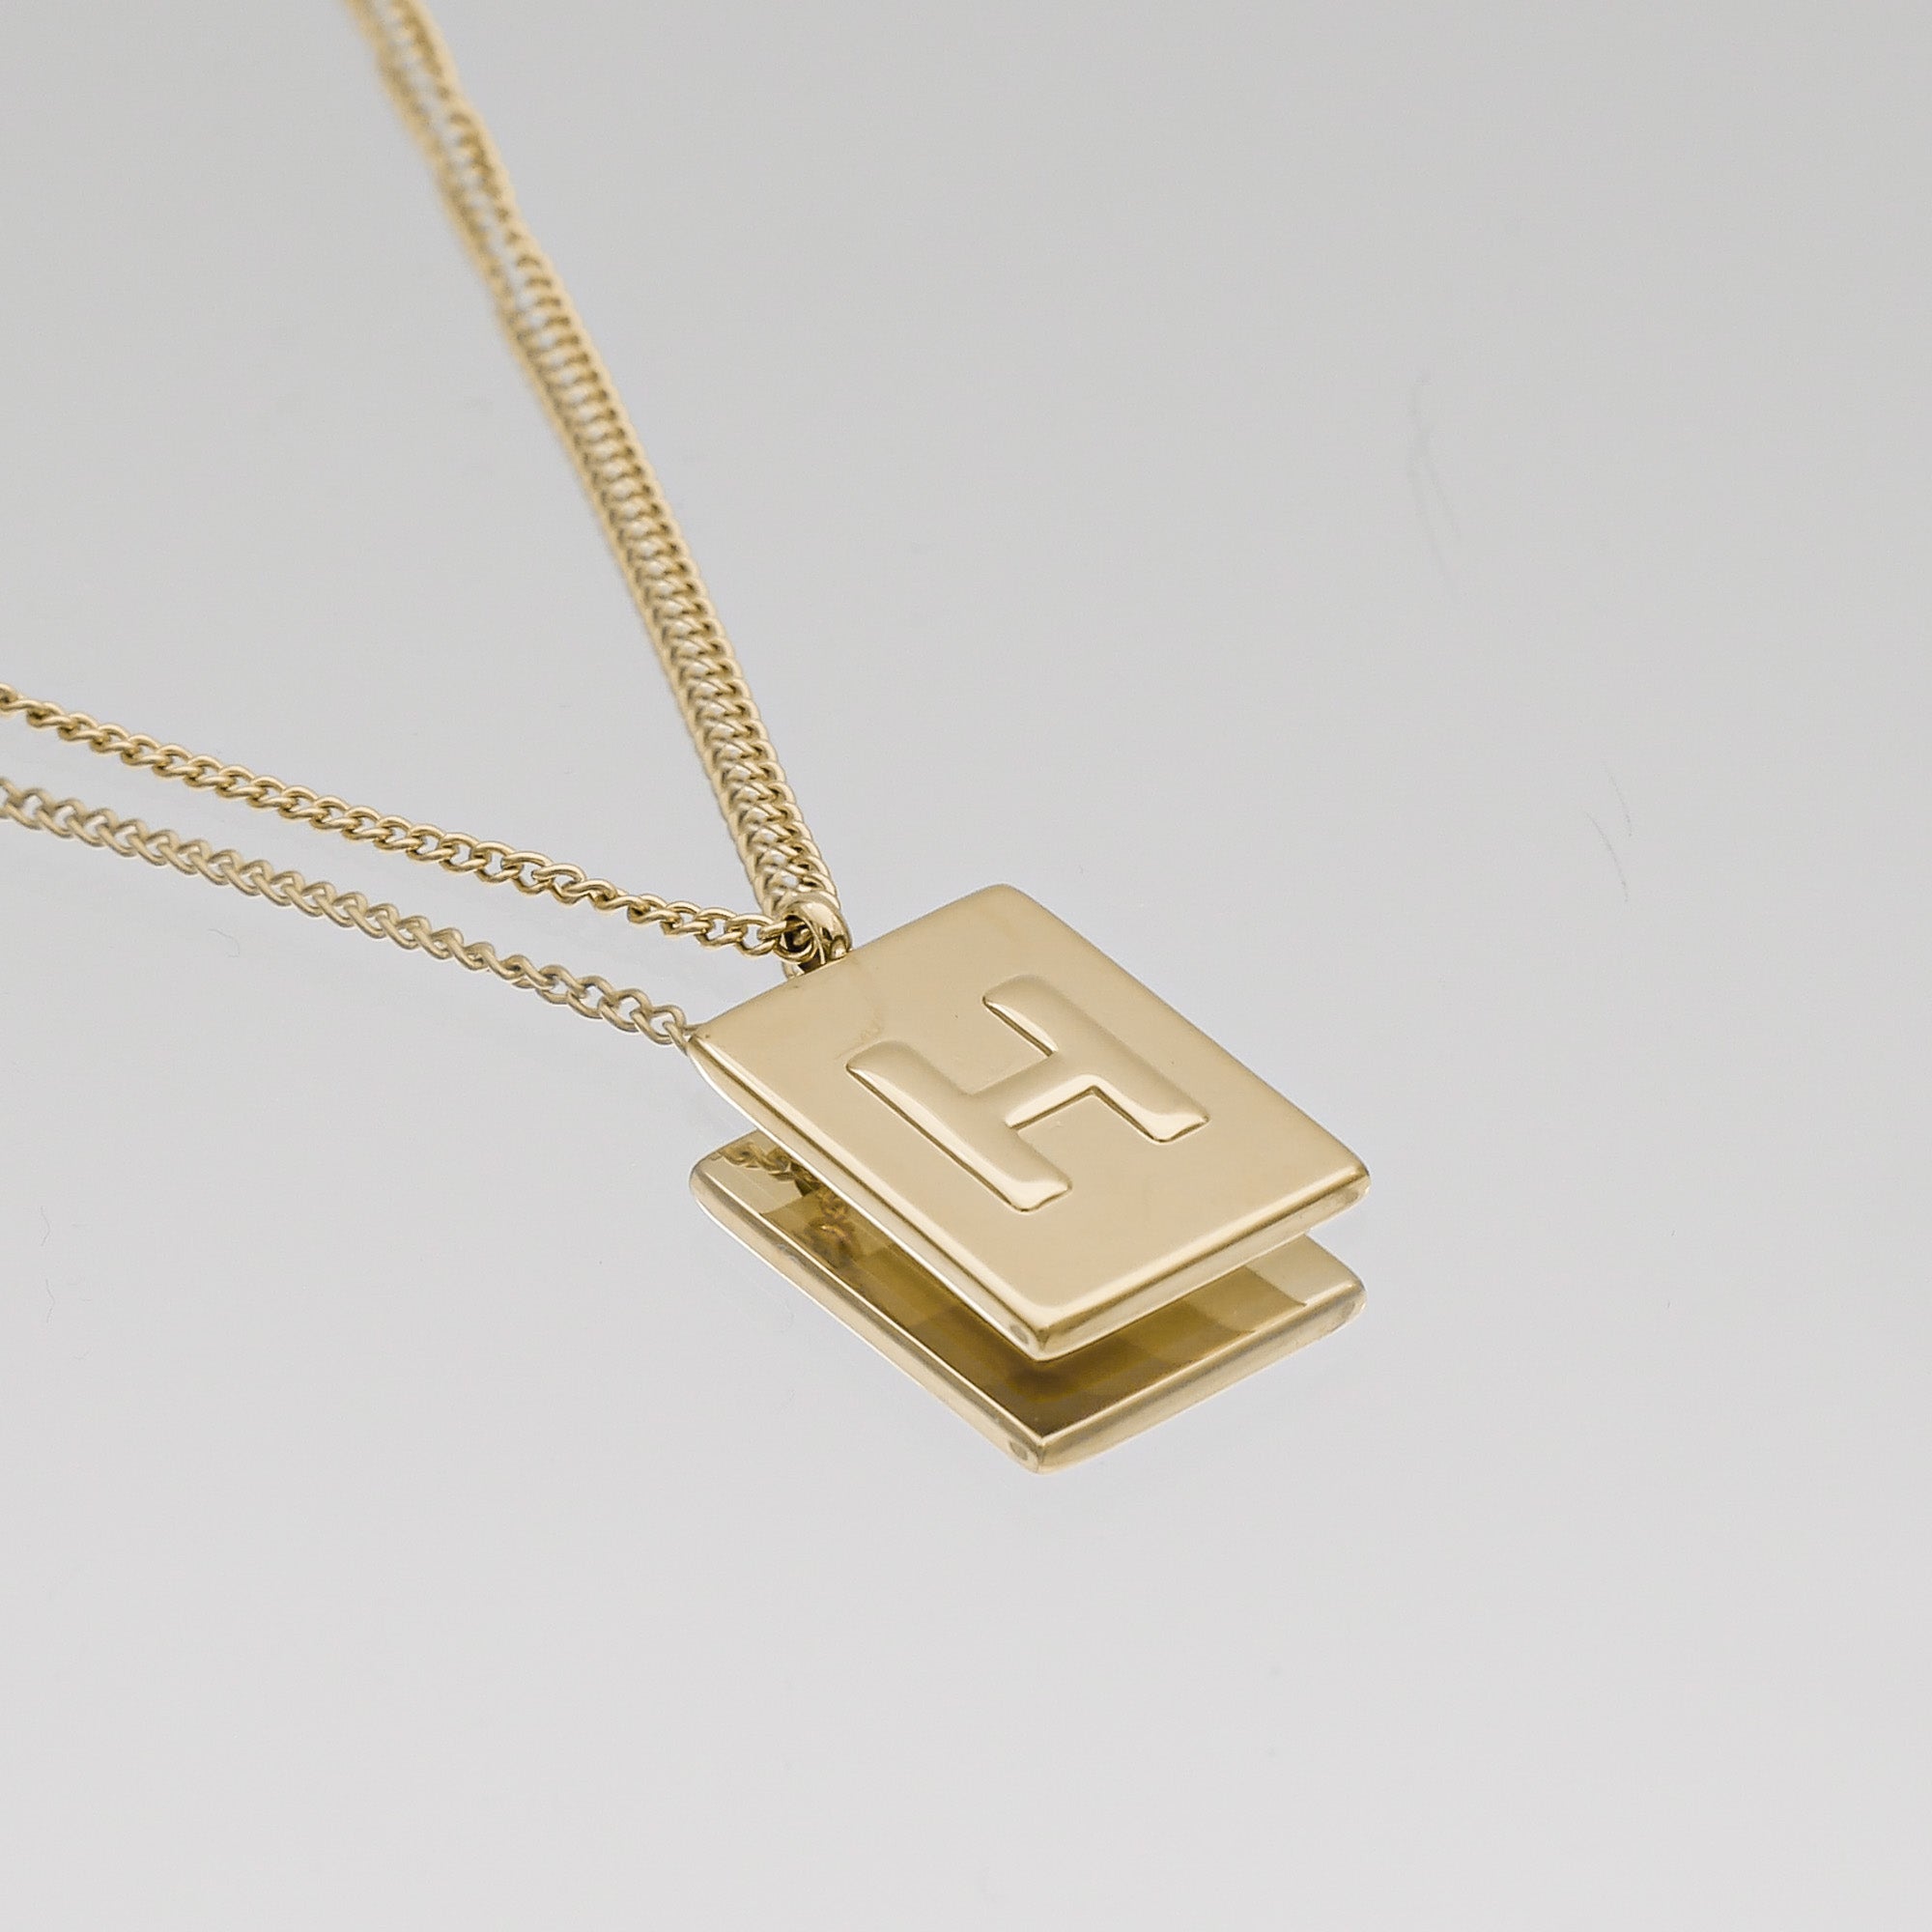 Athena custom initial Gold pendant Necklace, letter H by PRYA